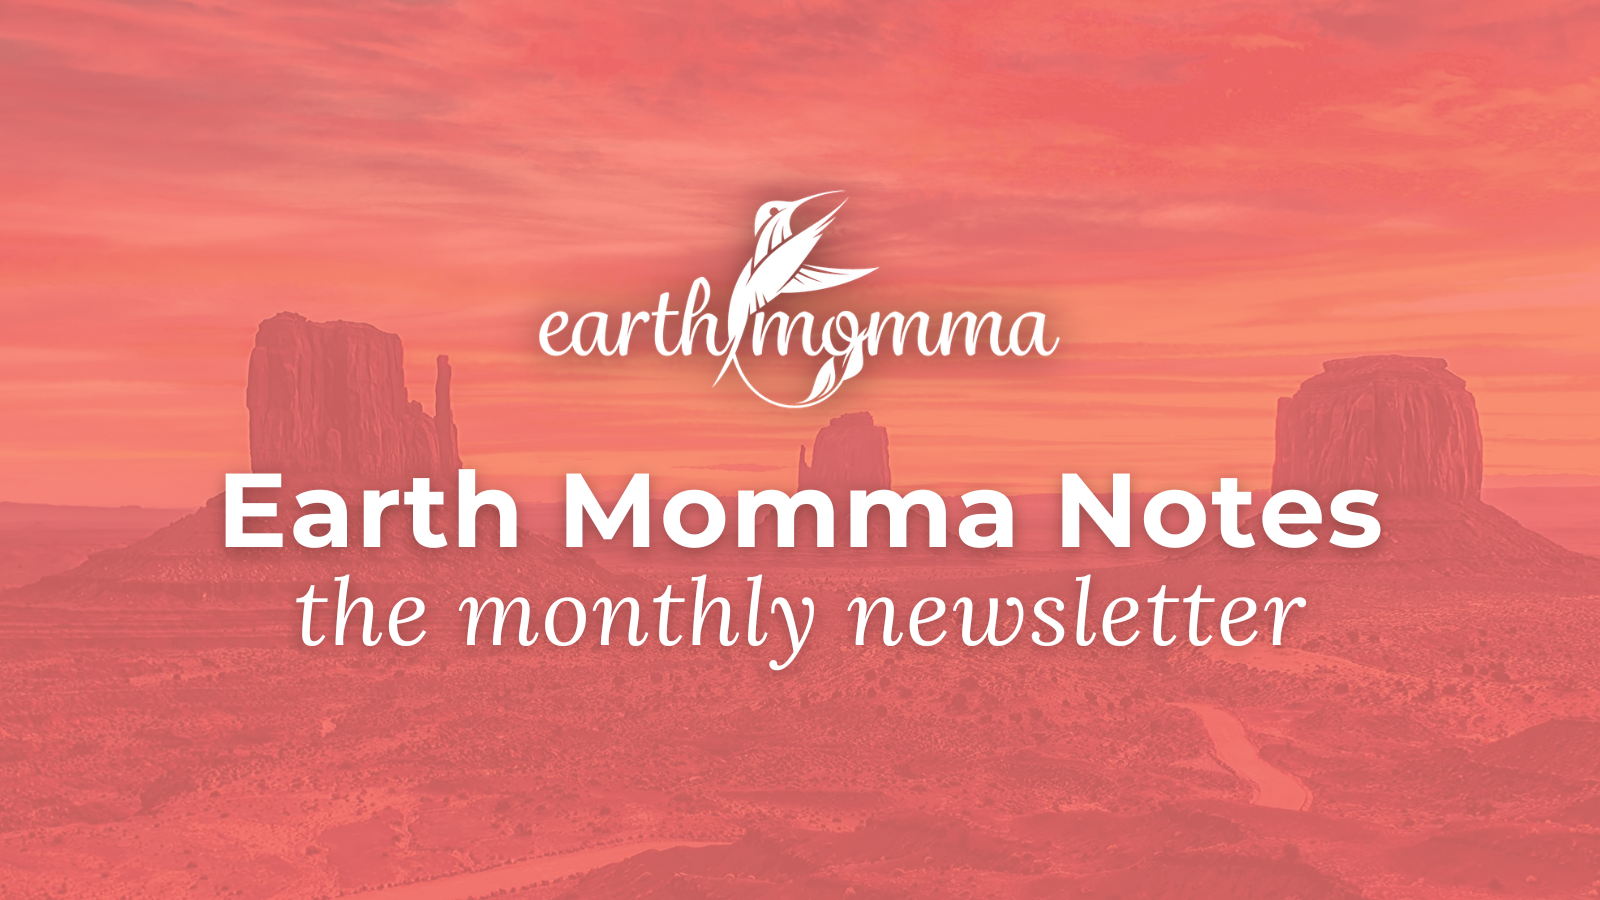 The words "Earth Momma Notes the monthly newsletter" in white text laid over an image of a mountain-scape in the color coral.